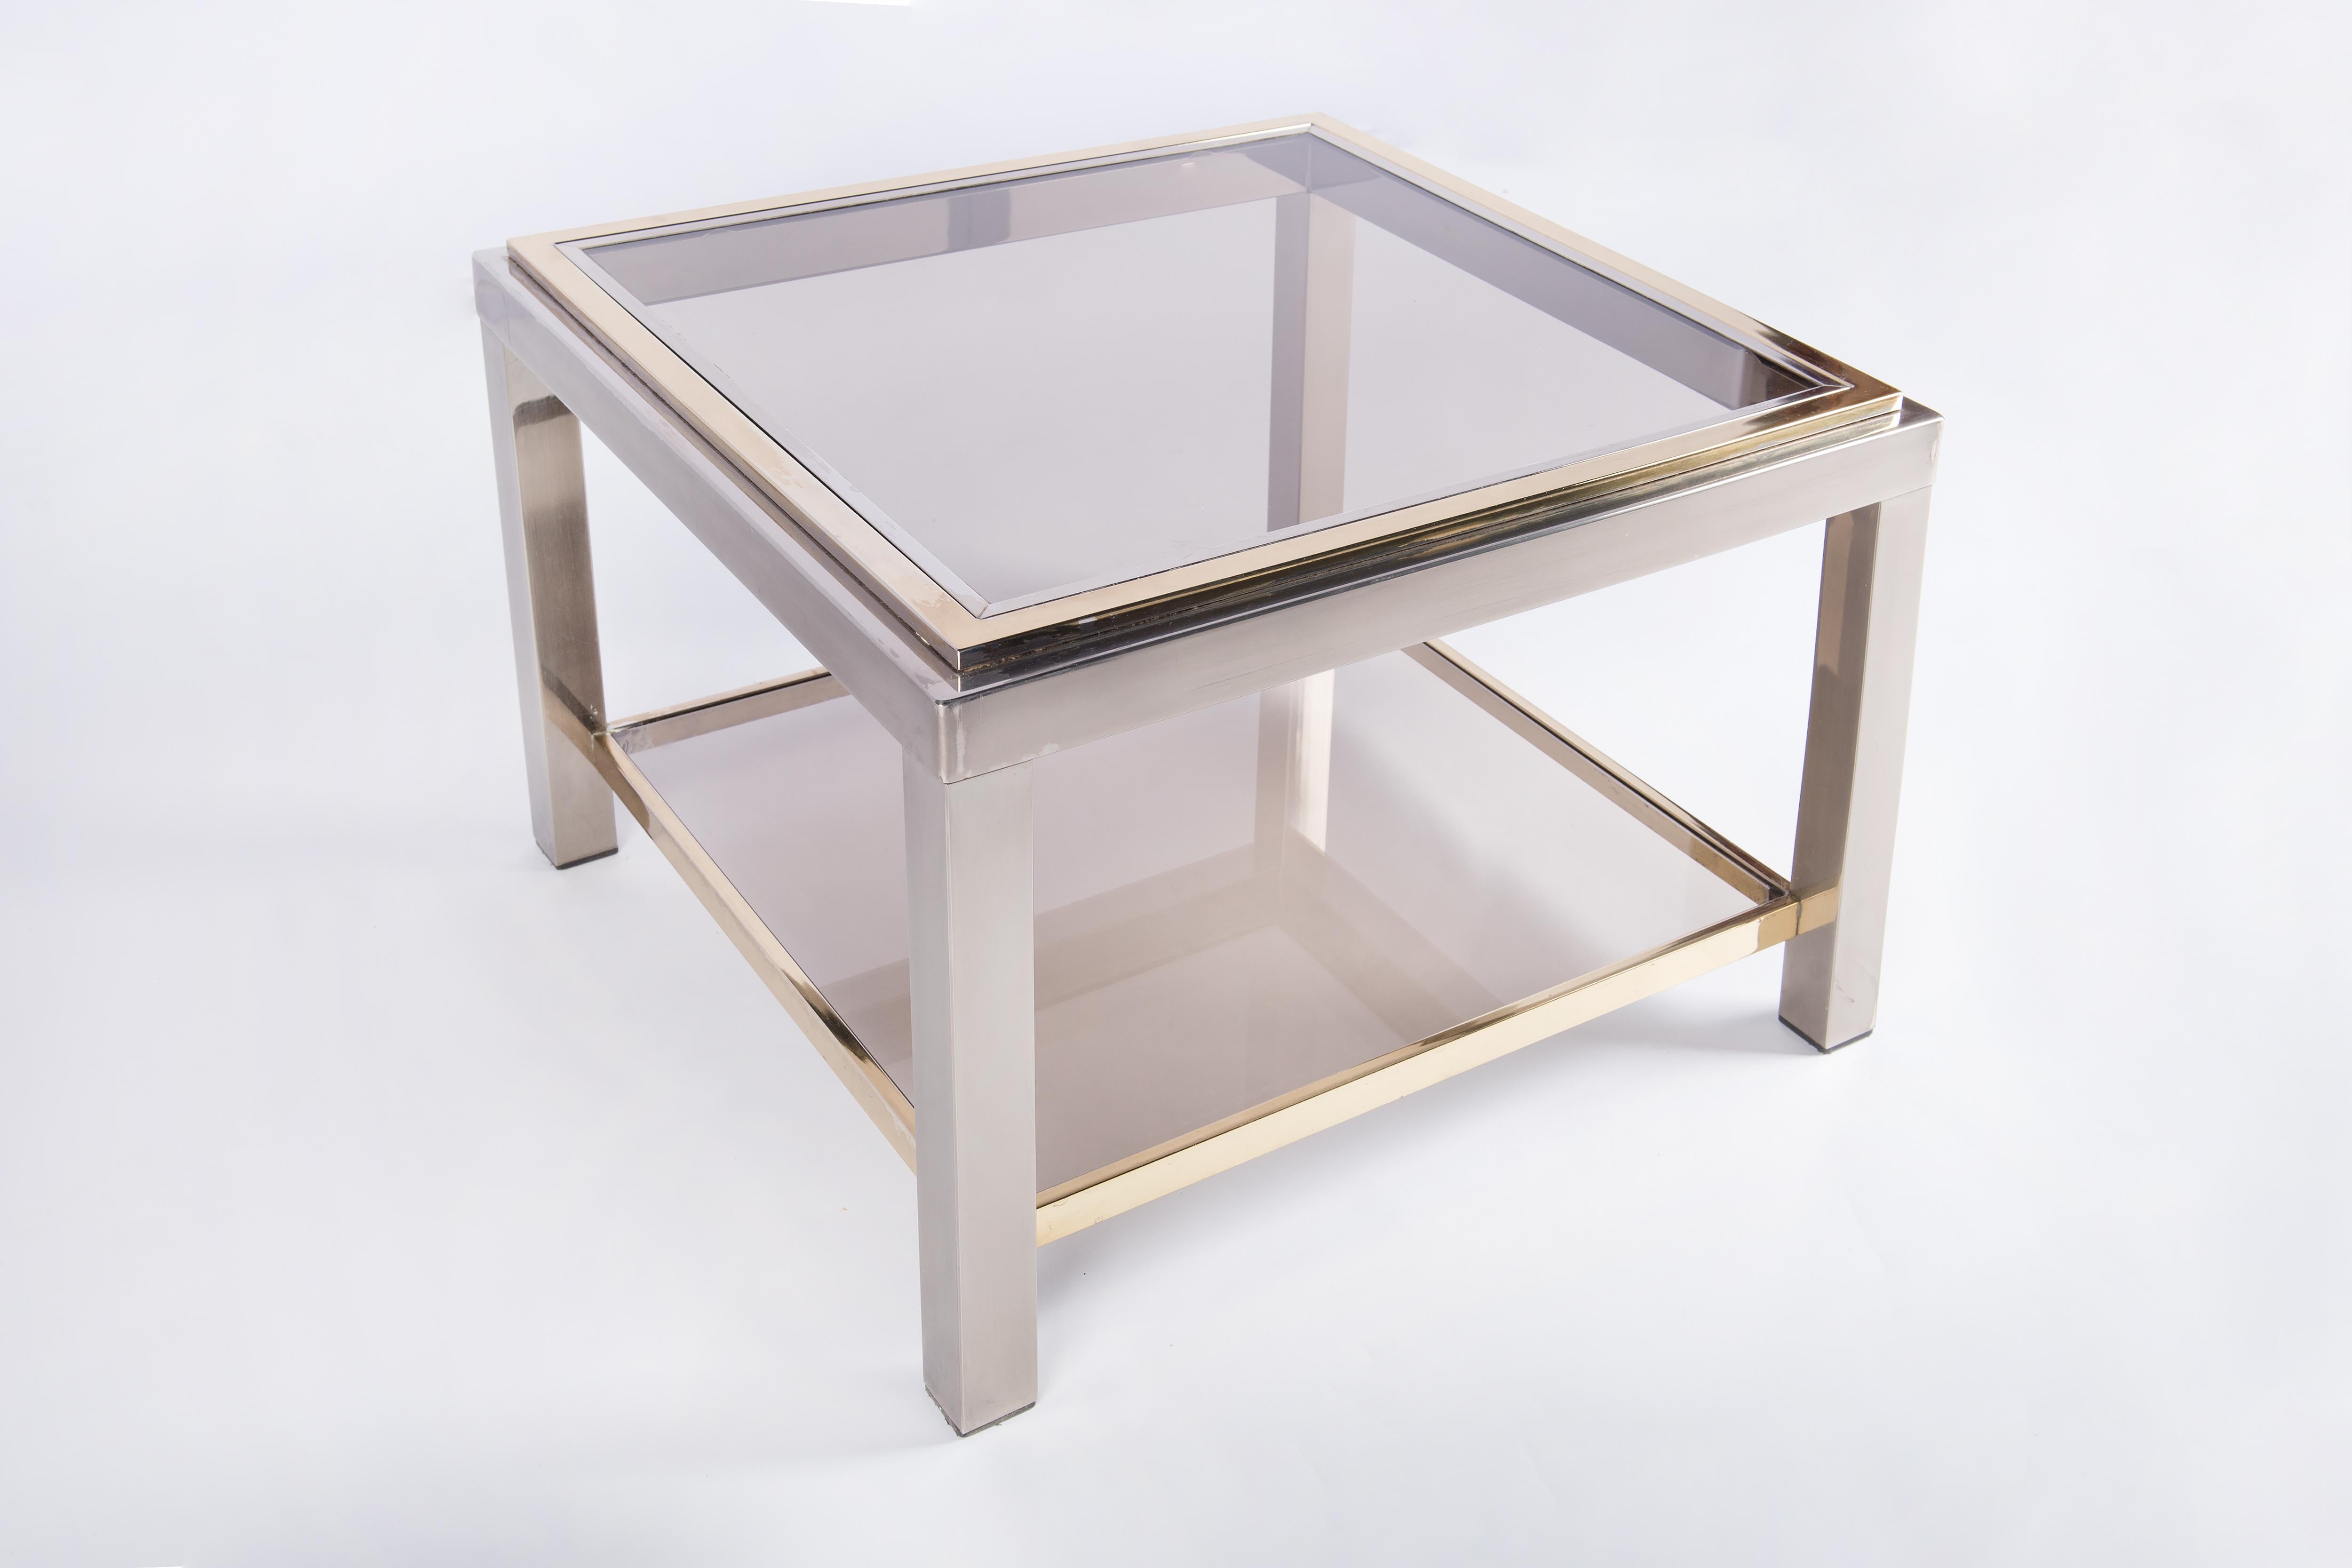 Pair of brass and tempered glass coffee tables from 1980s. They can be used as night stands as well as side tables. French origin.